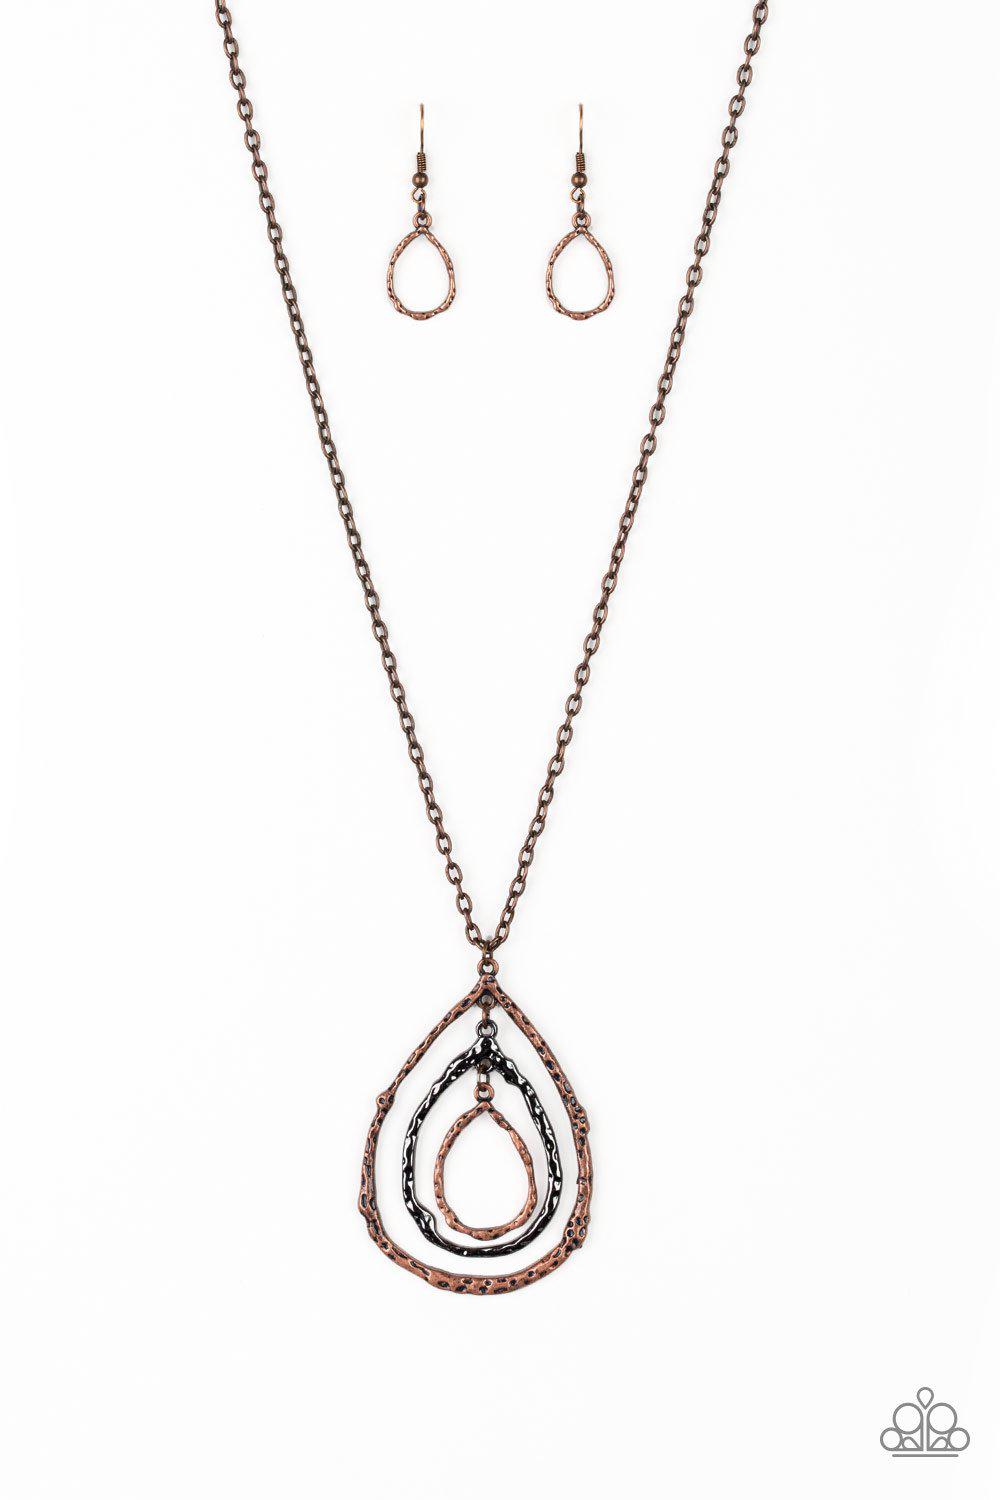 Going For Grit Copper Teardrop Necklace - Paparazzi Accessories - lightbox -CarasShop.com - $5 Jewelry by Cara Jewels